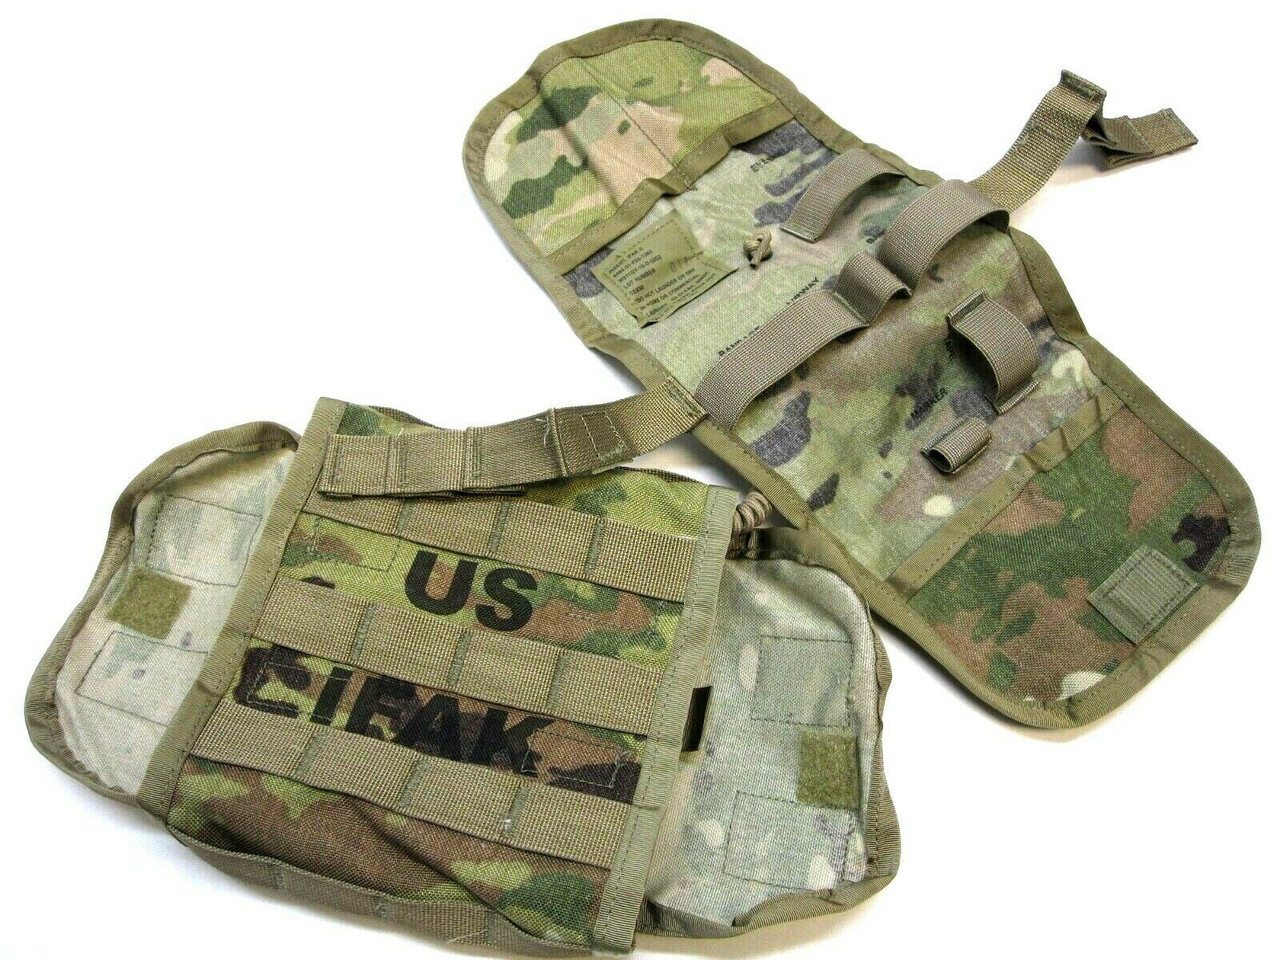 NEW ACU ARMY OCP IFAK II FIRST AID KIT MEDIC POUCH AND INSERT MULTICAM (EMPTY)